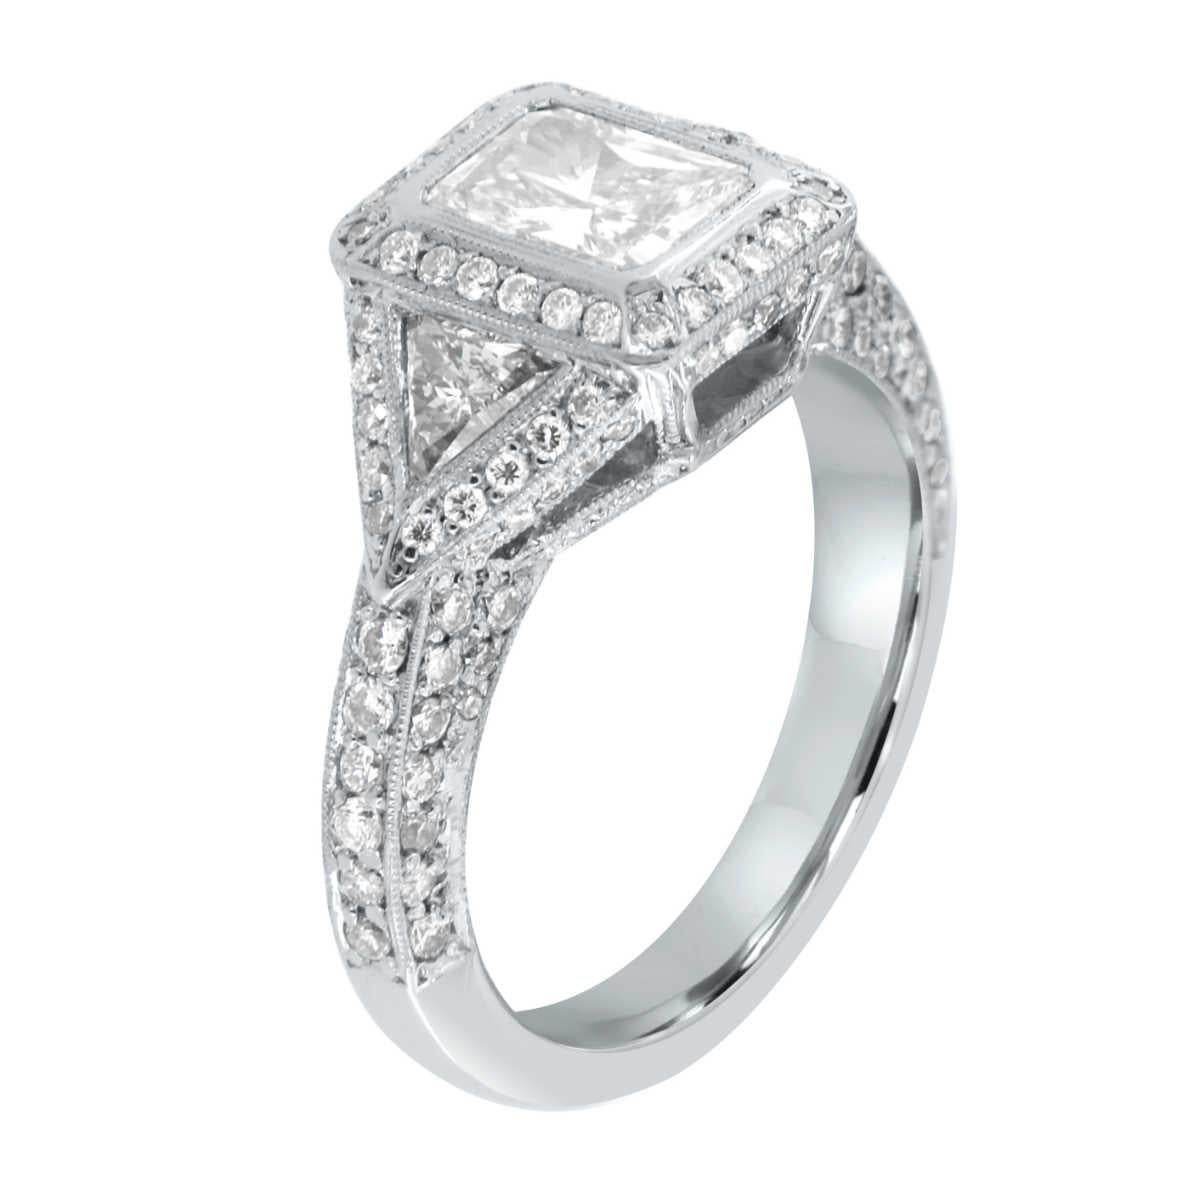 This Pre-Owend Platinum handcrafted Women's trilogy ring showcases an EGL Certified 1.03 Carat Radiant Cut natural diamond accompanied by two (2) Trillion Cut diamonds on each side, along with a melee of Round Brilliant diamonds on an elegant